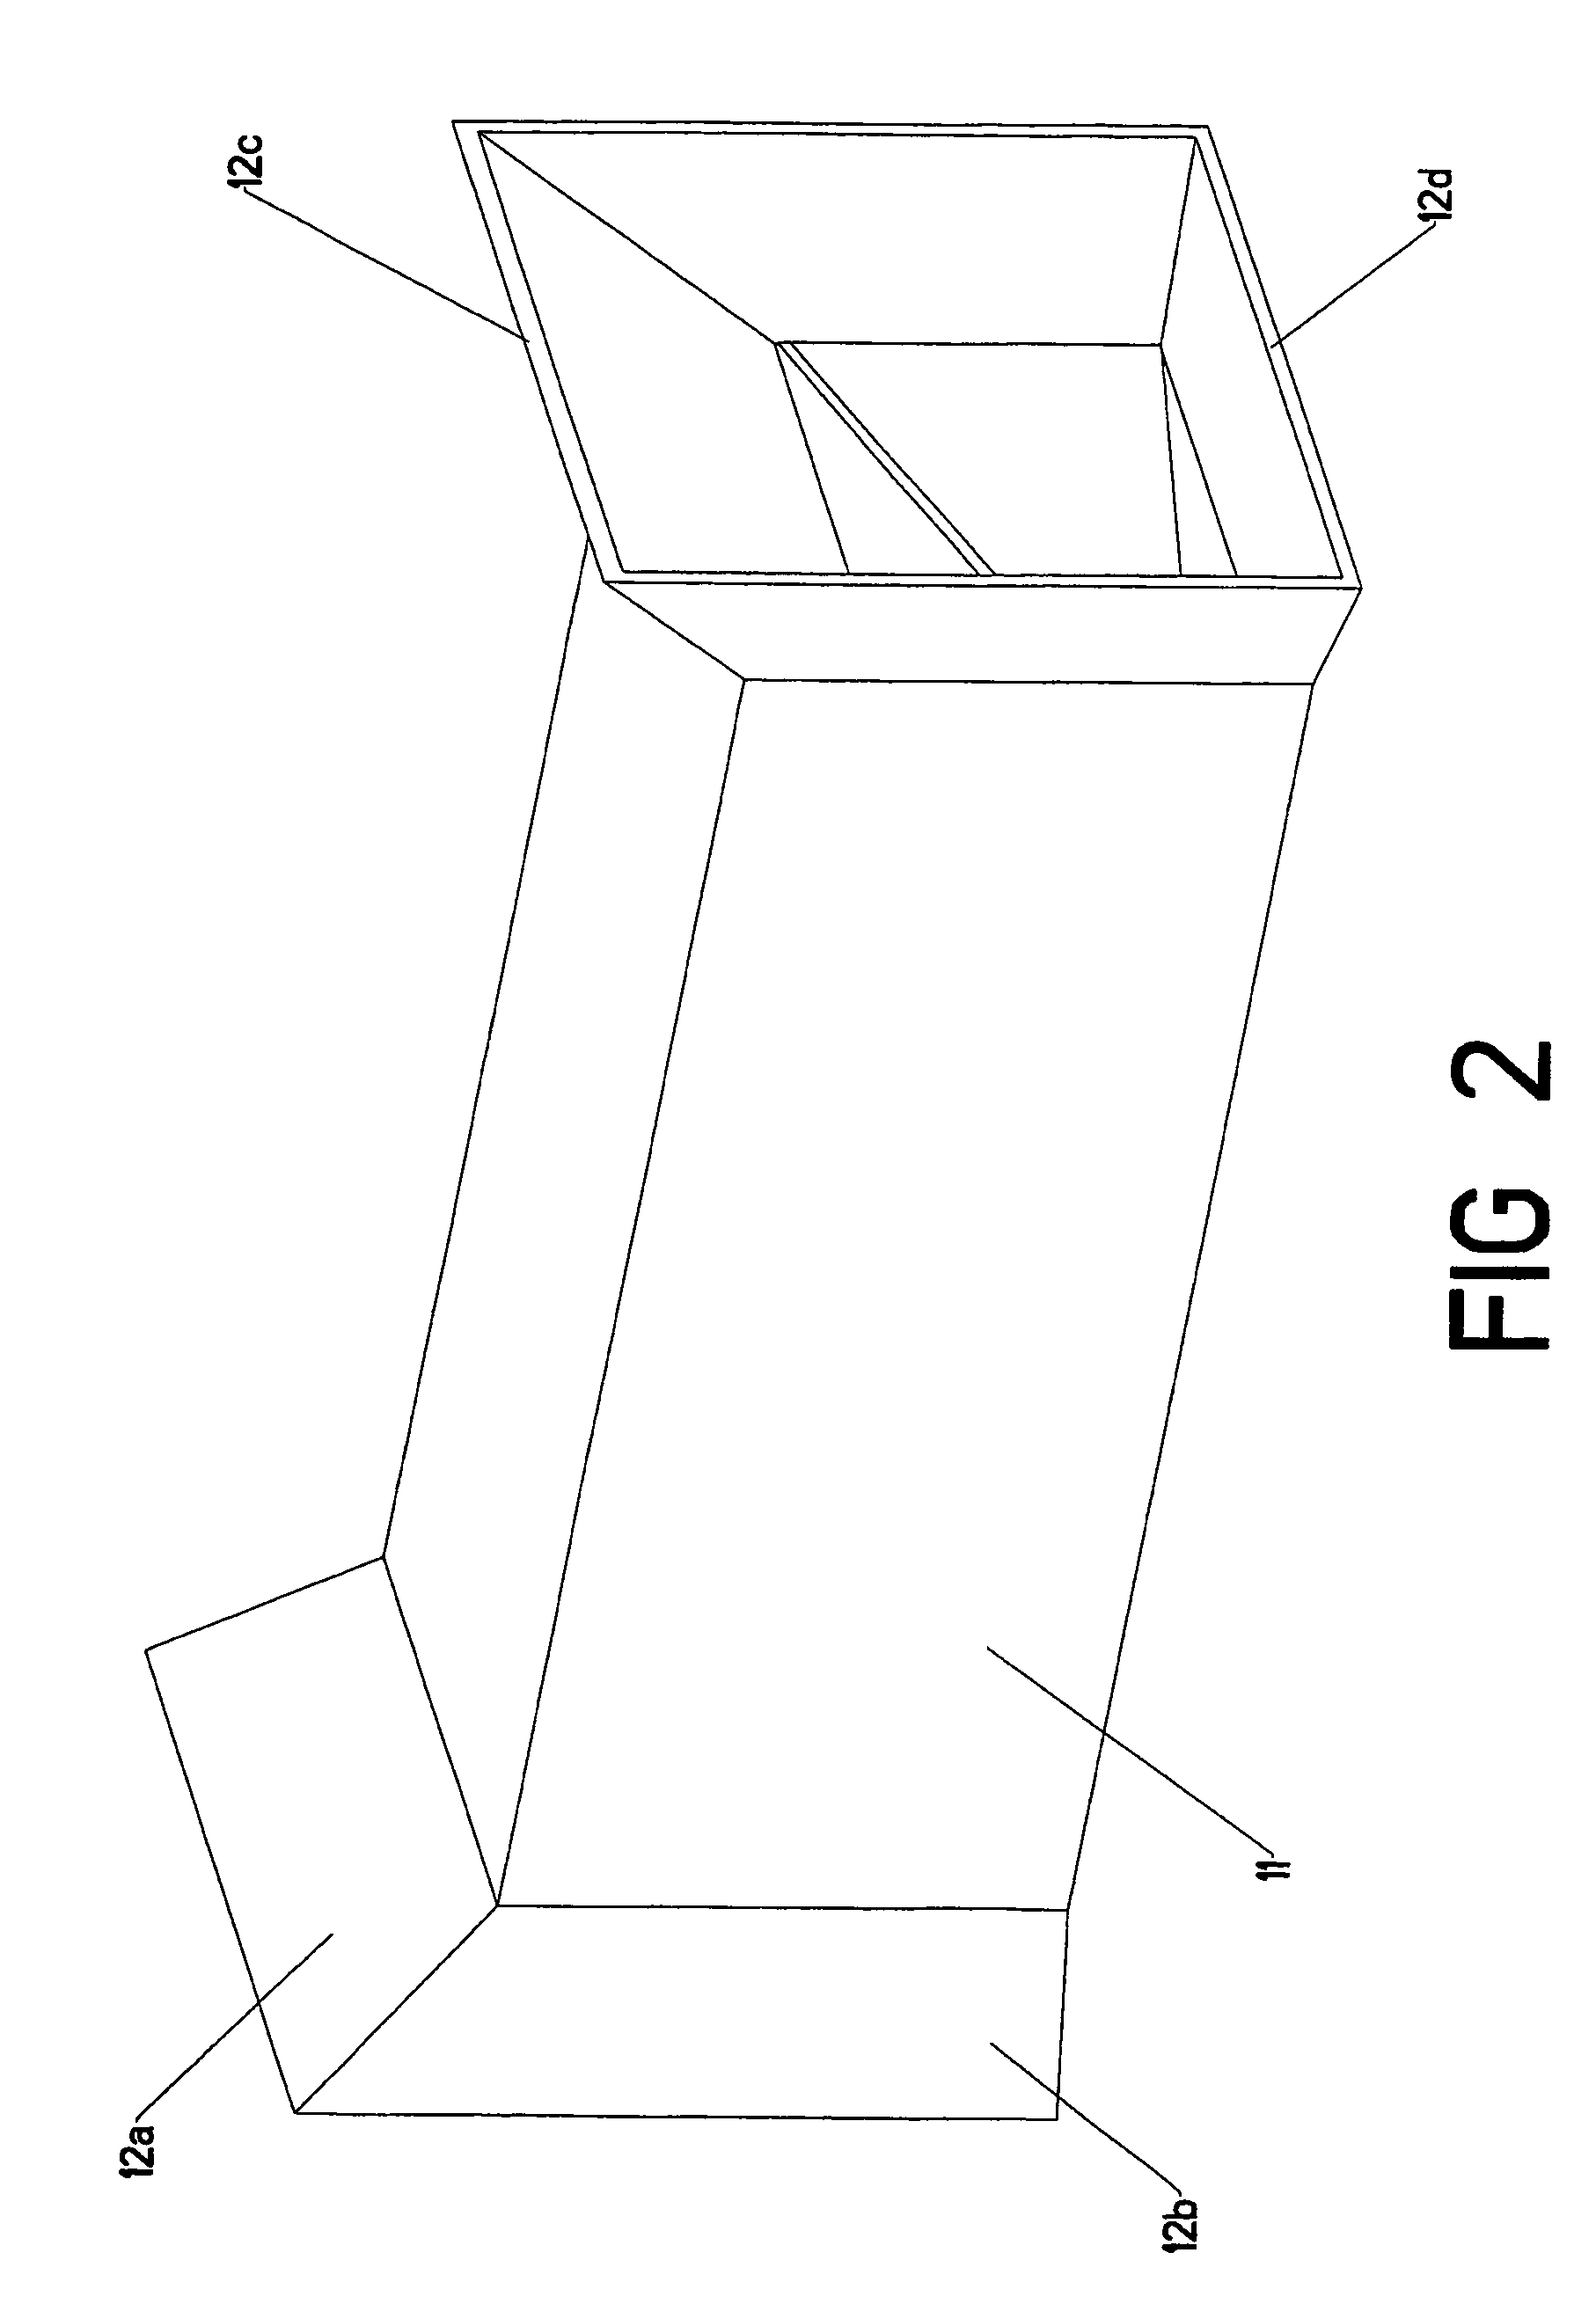 Transportable hydro-electric generating system with improved water pressure enhancement feature activation systems